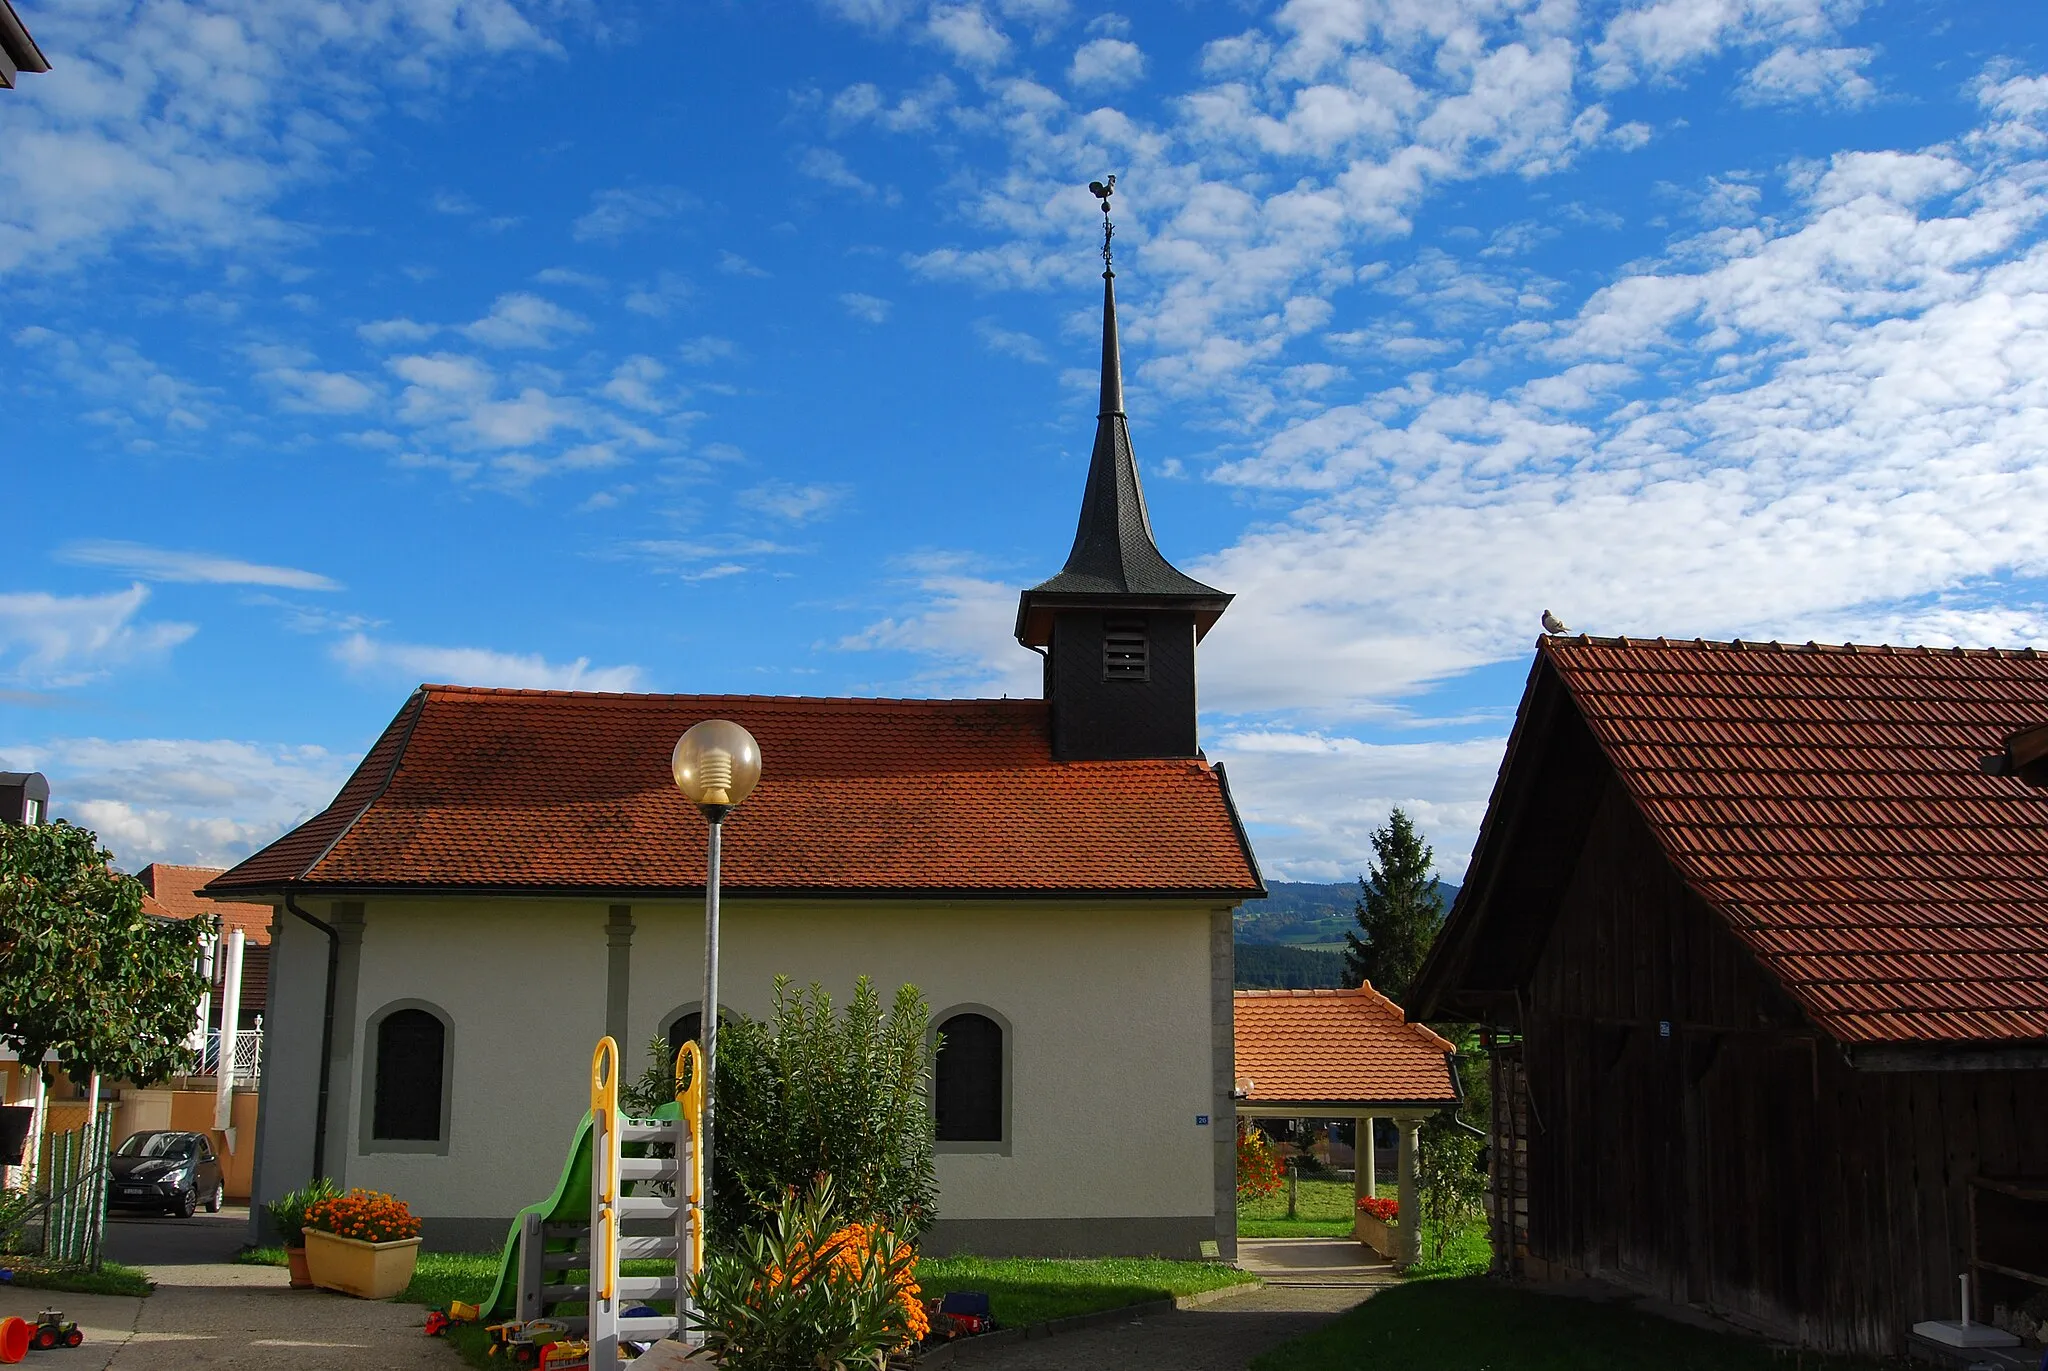 Photo showing: Chapel of Chénens, canton of Fribourg, Switzerland